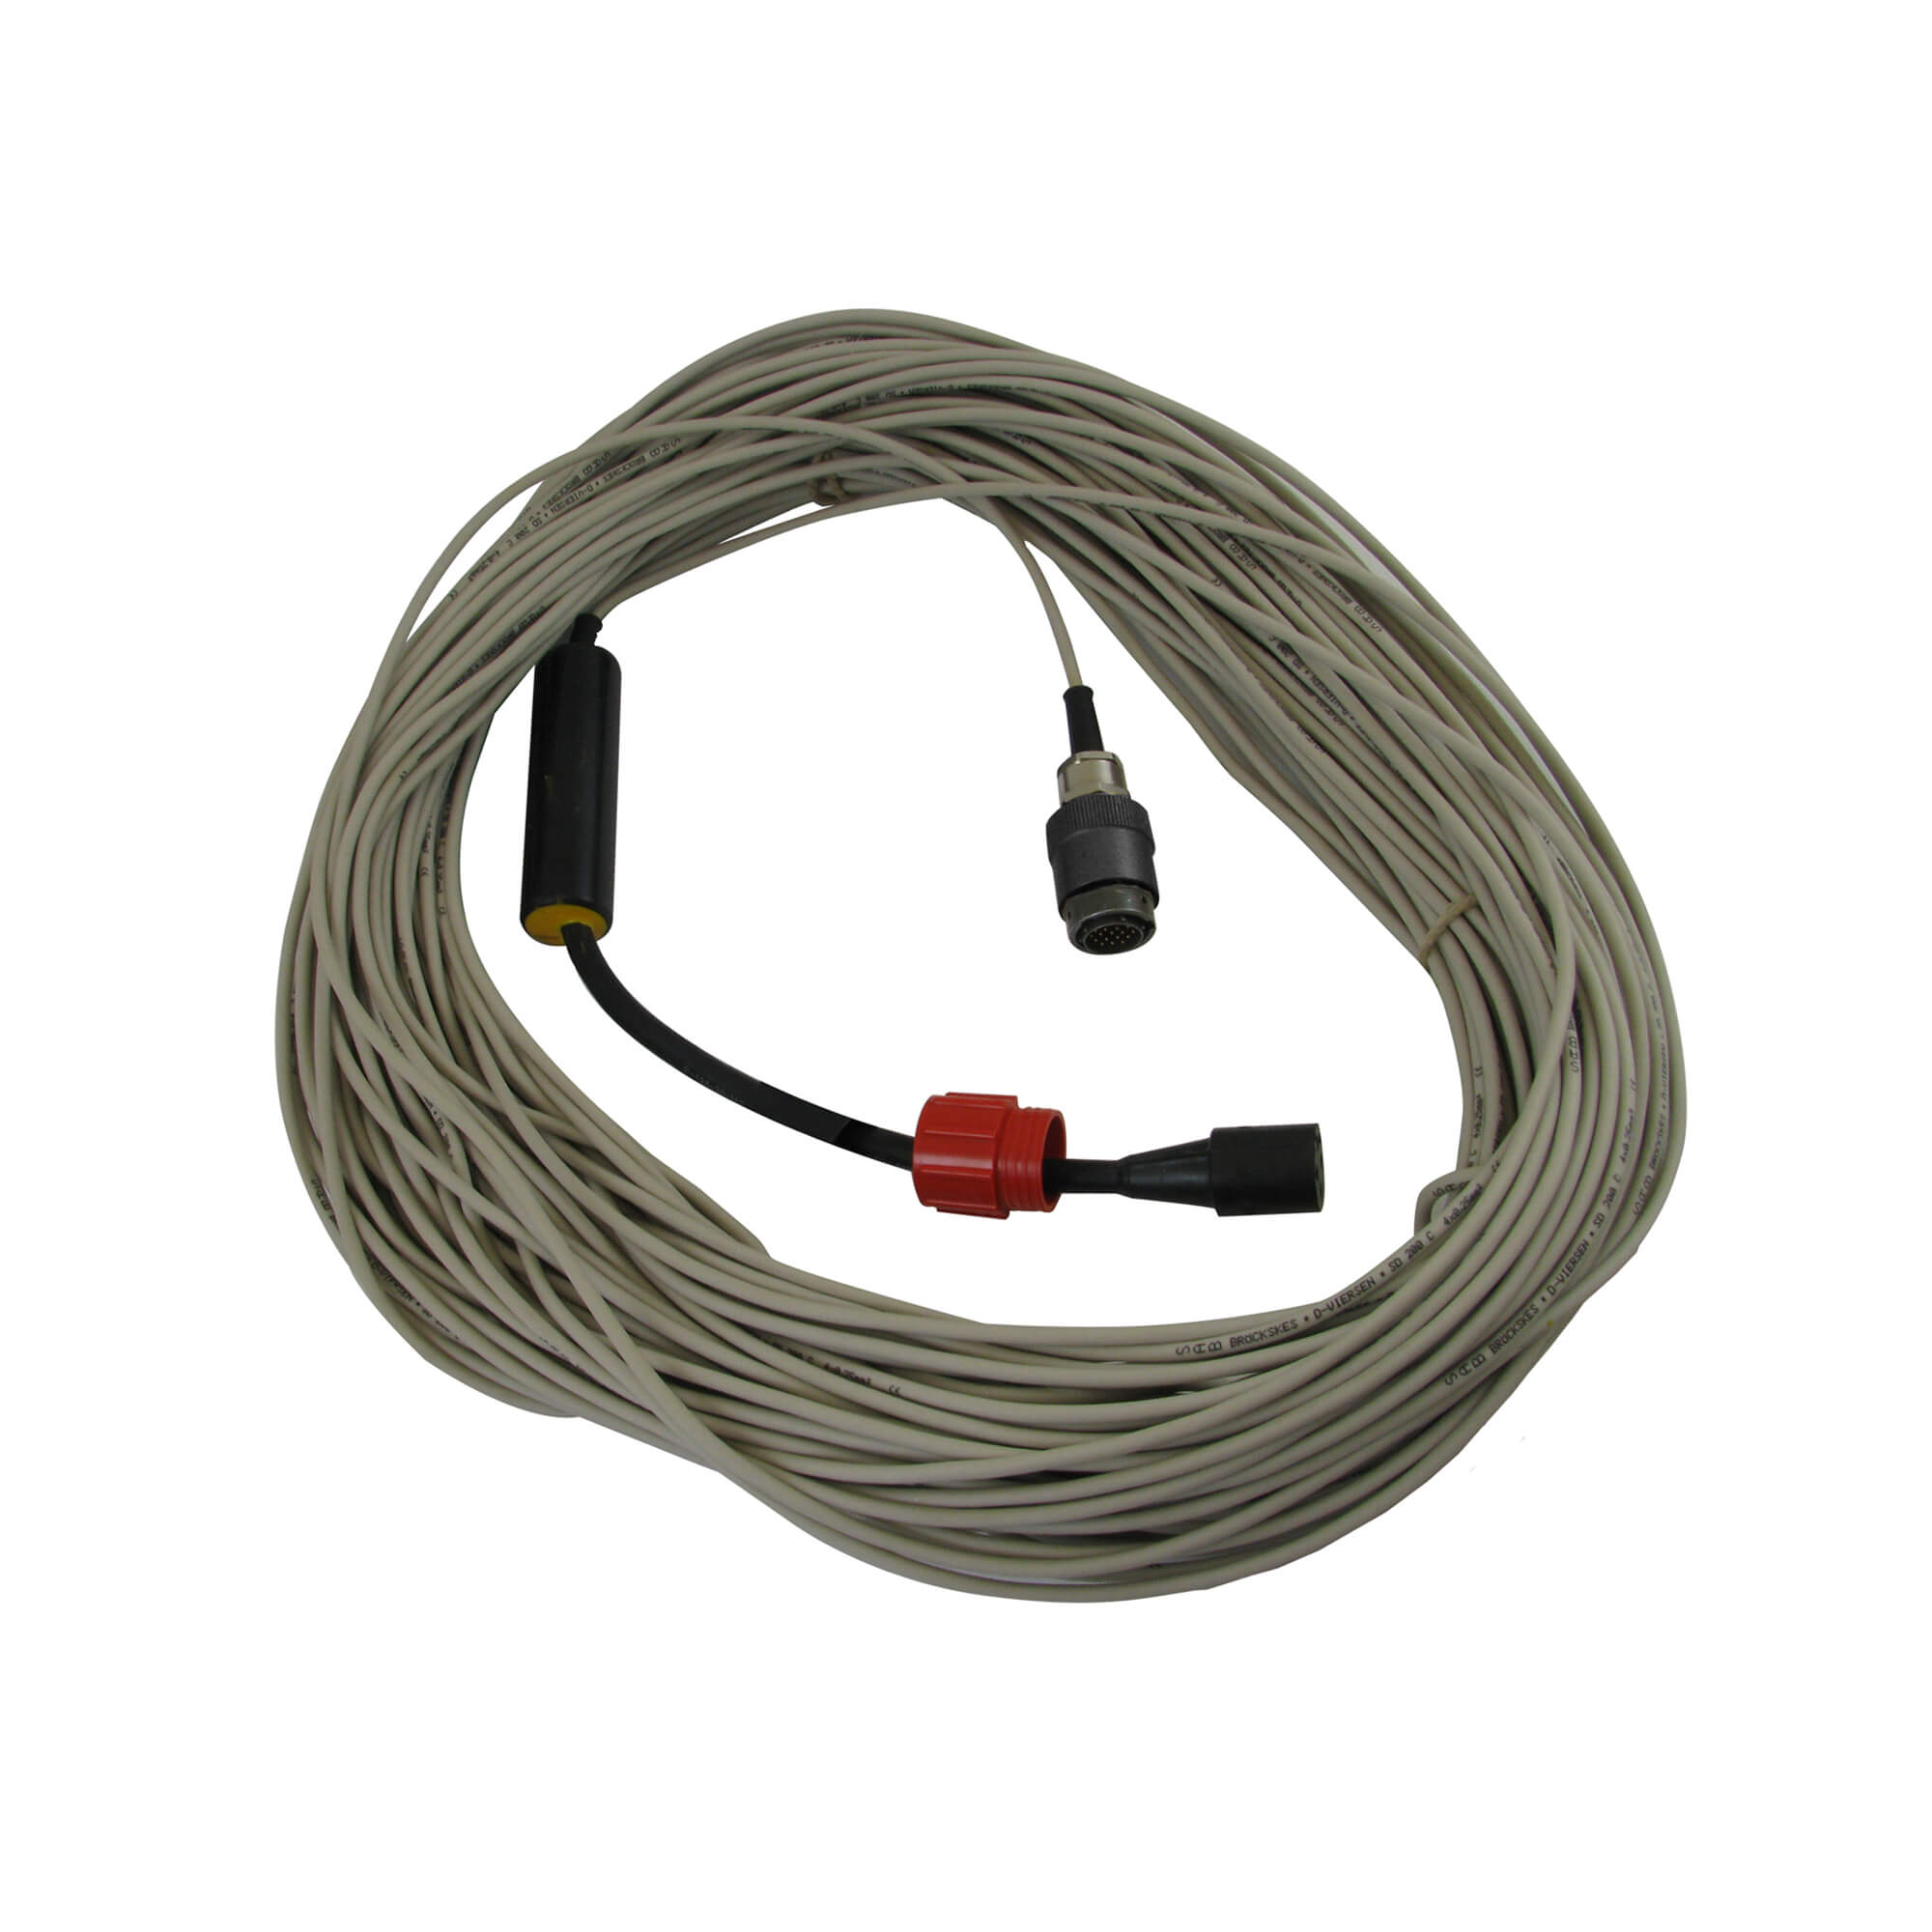 Communication cable for Ibsophone MTIII